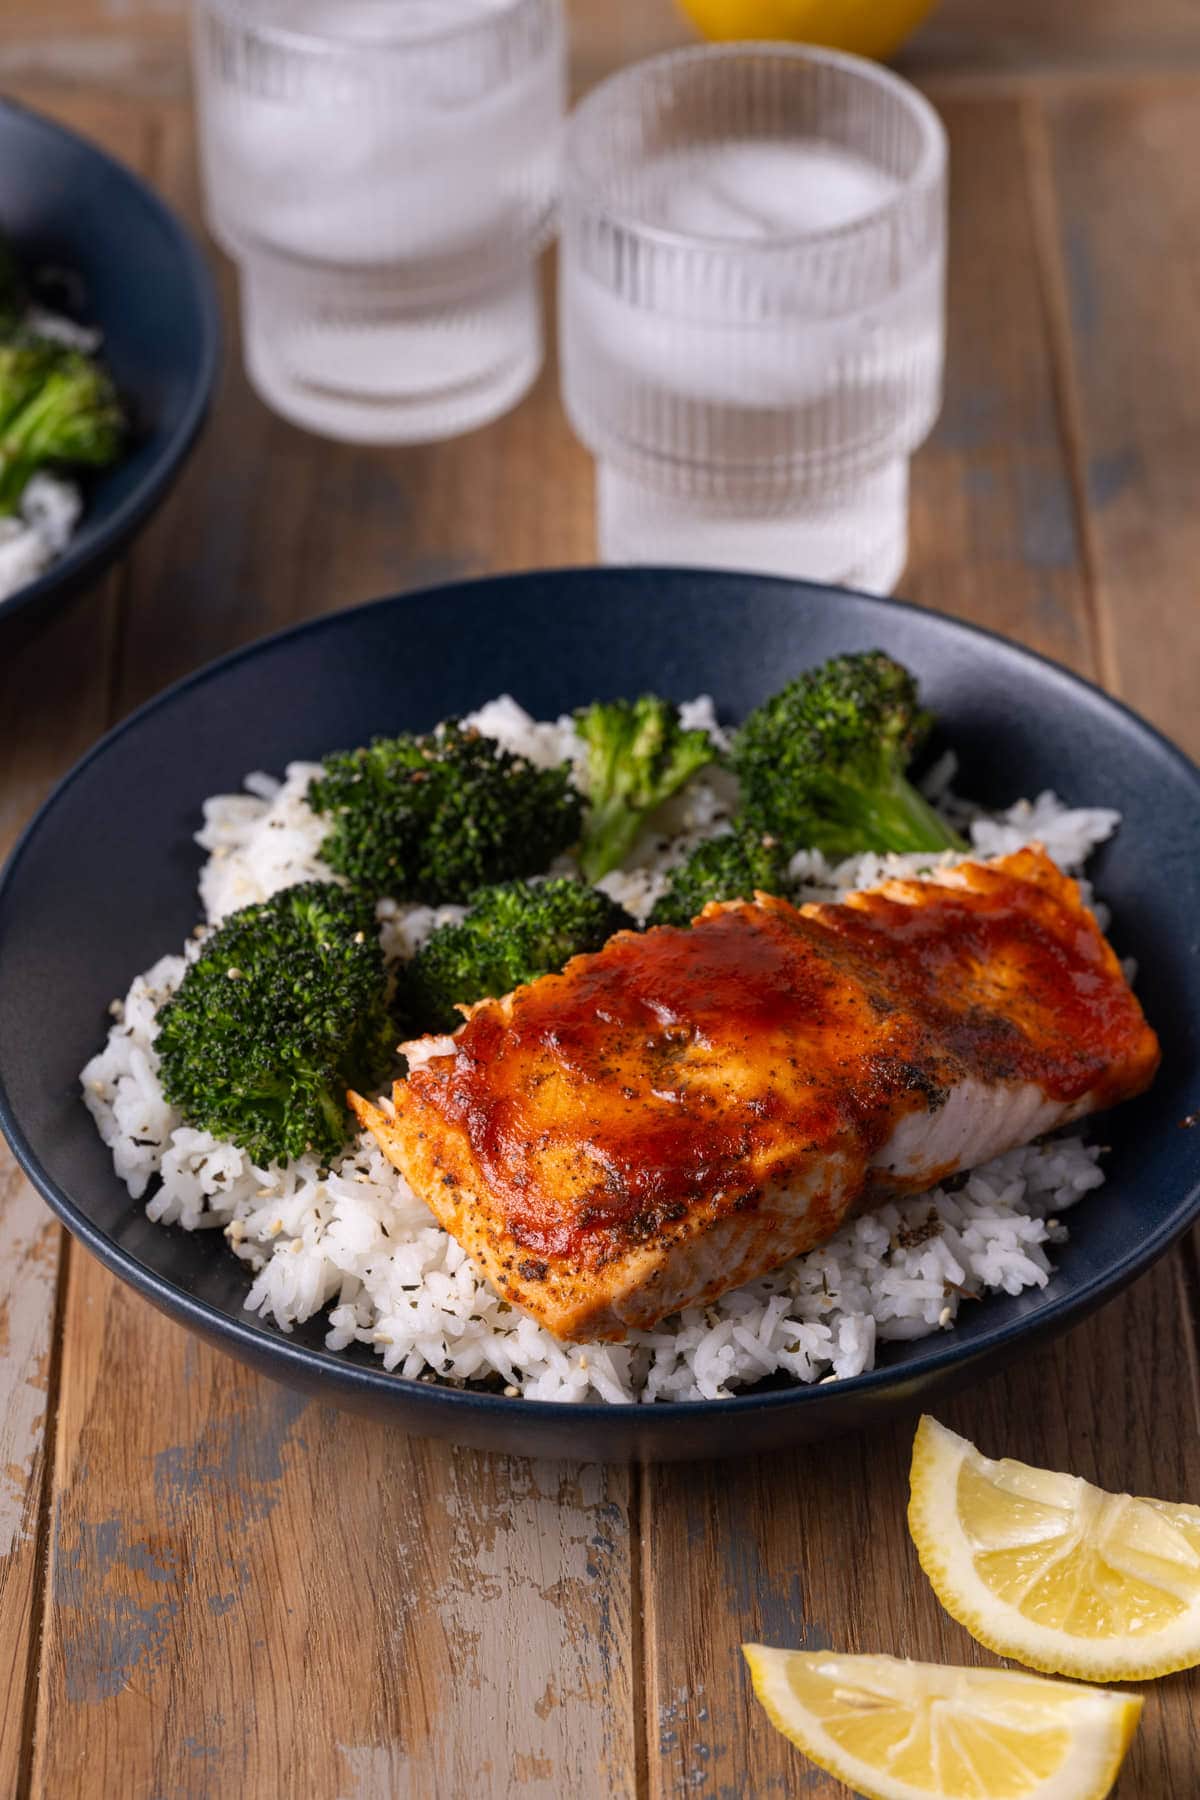 Honey sriracha salmon served with broccoli over a bed of rice.